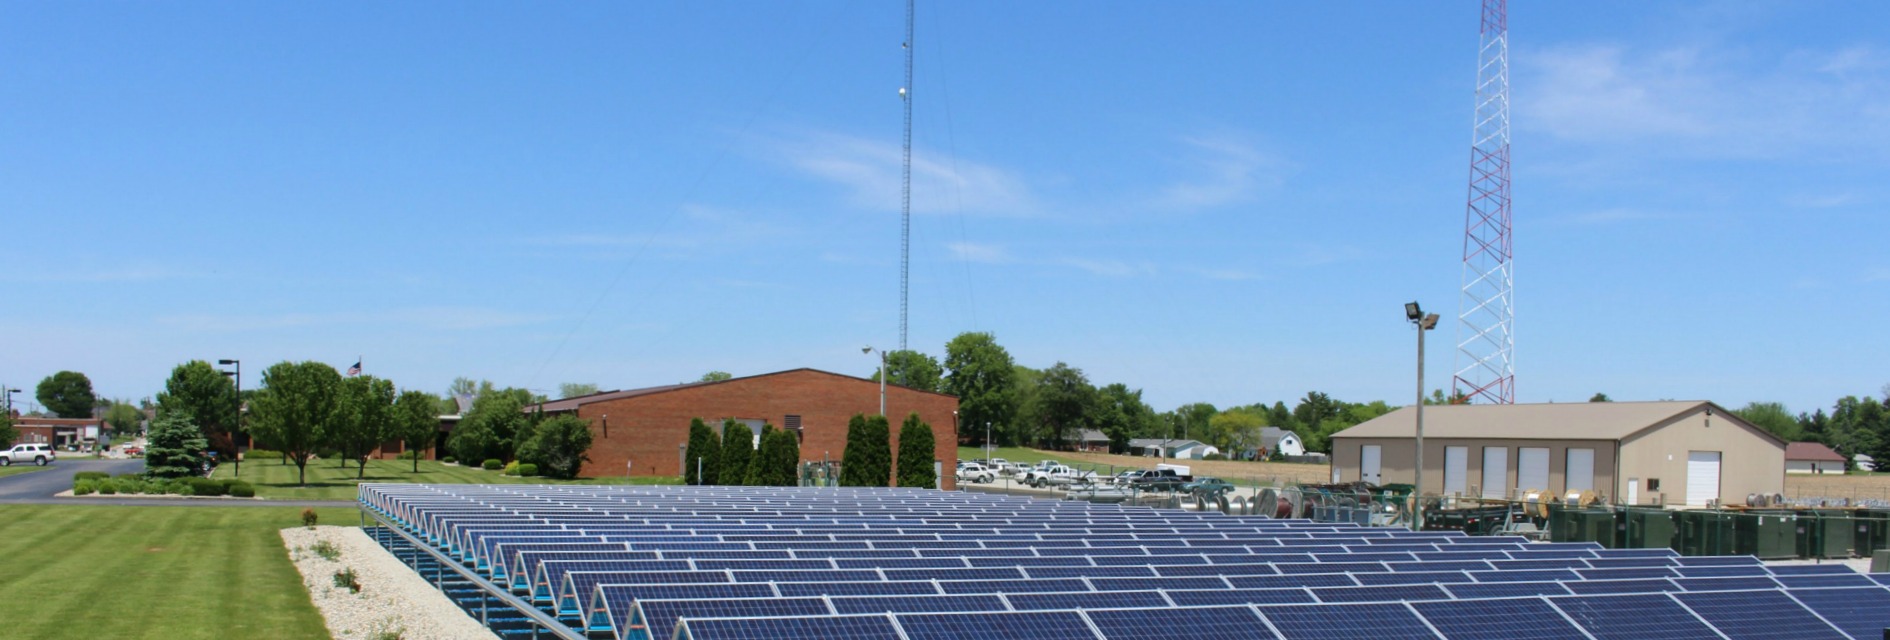 Community Solar: Lots of Buzz, but Where’s the Action?